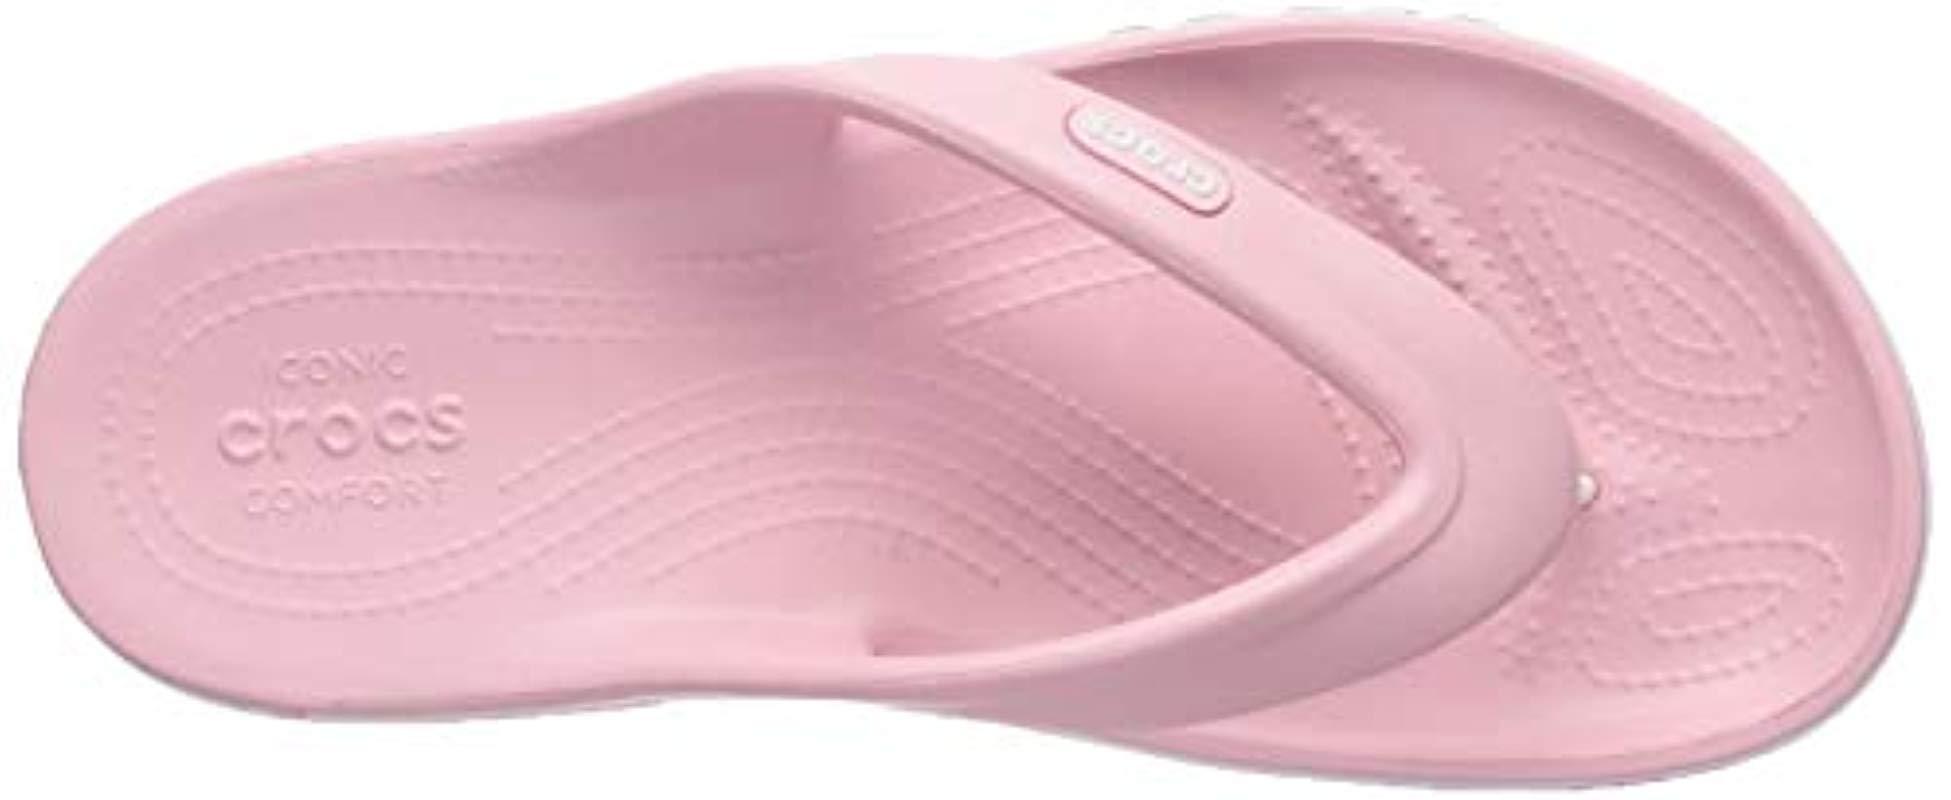 Crocs™ And Bayaband Flip Flop | Casual Flip Flops | Shower Shoes in Pink |  Lyst